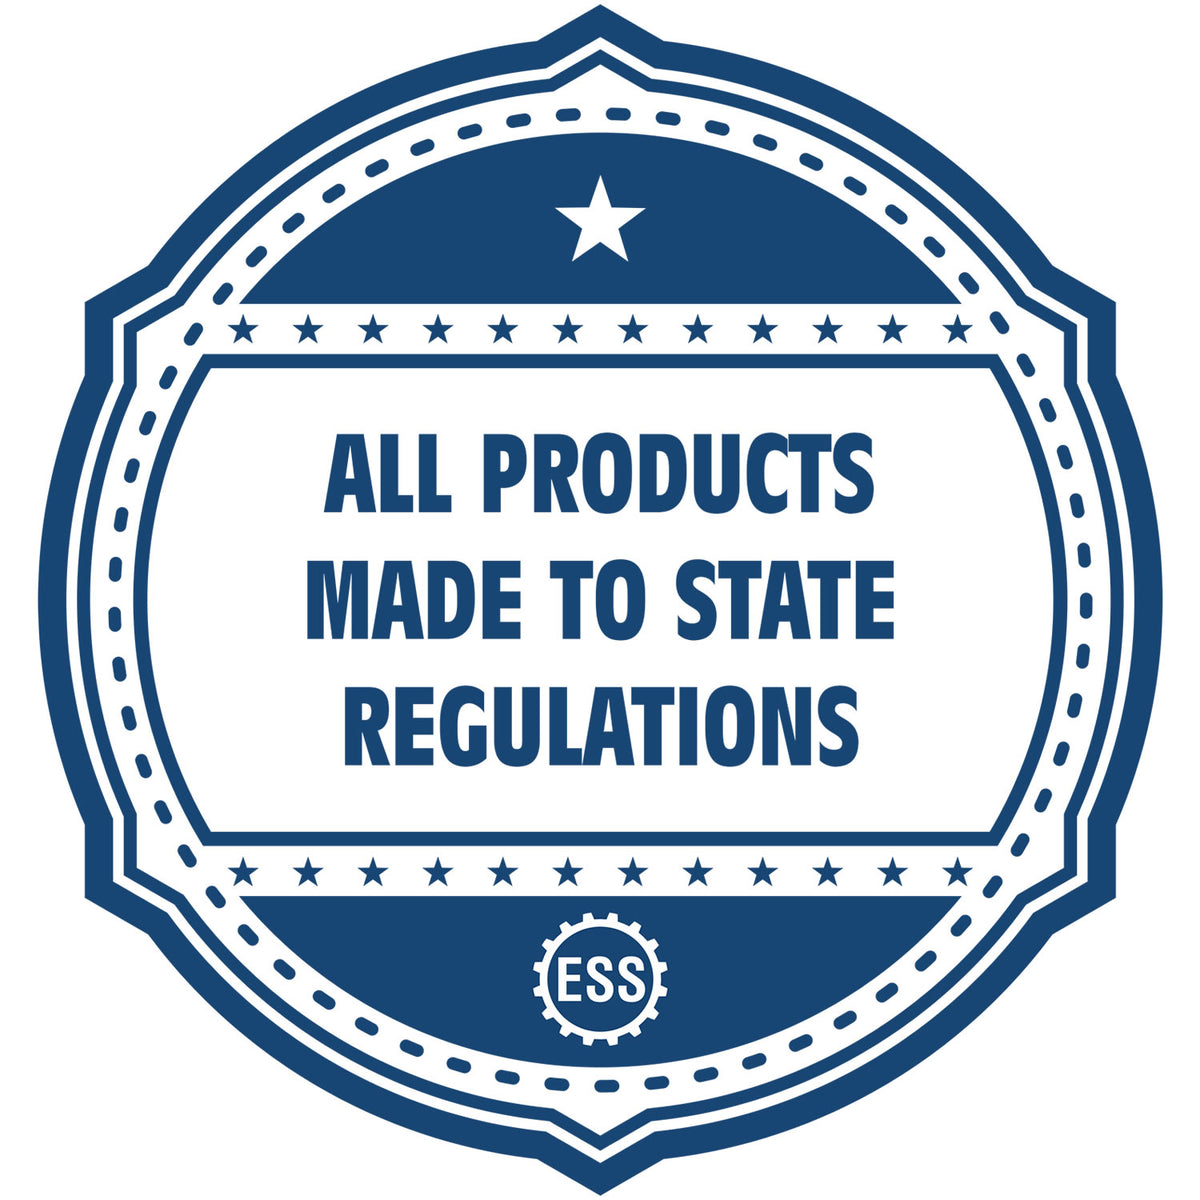 An icon or badge element for the Digital North Dakota PE Stamp and Electronic Seal for North Dakota Engineer showing that this product is made in compliance with state regulations.